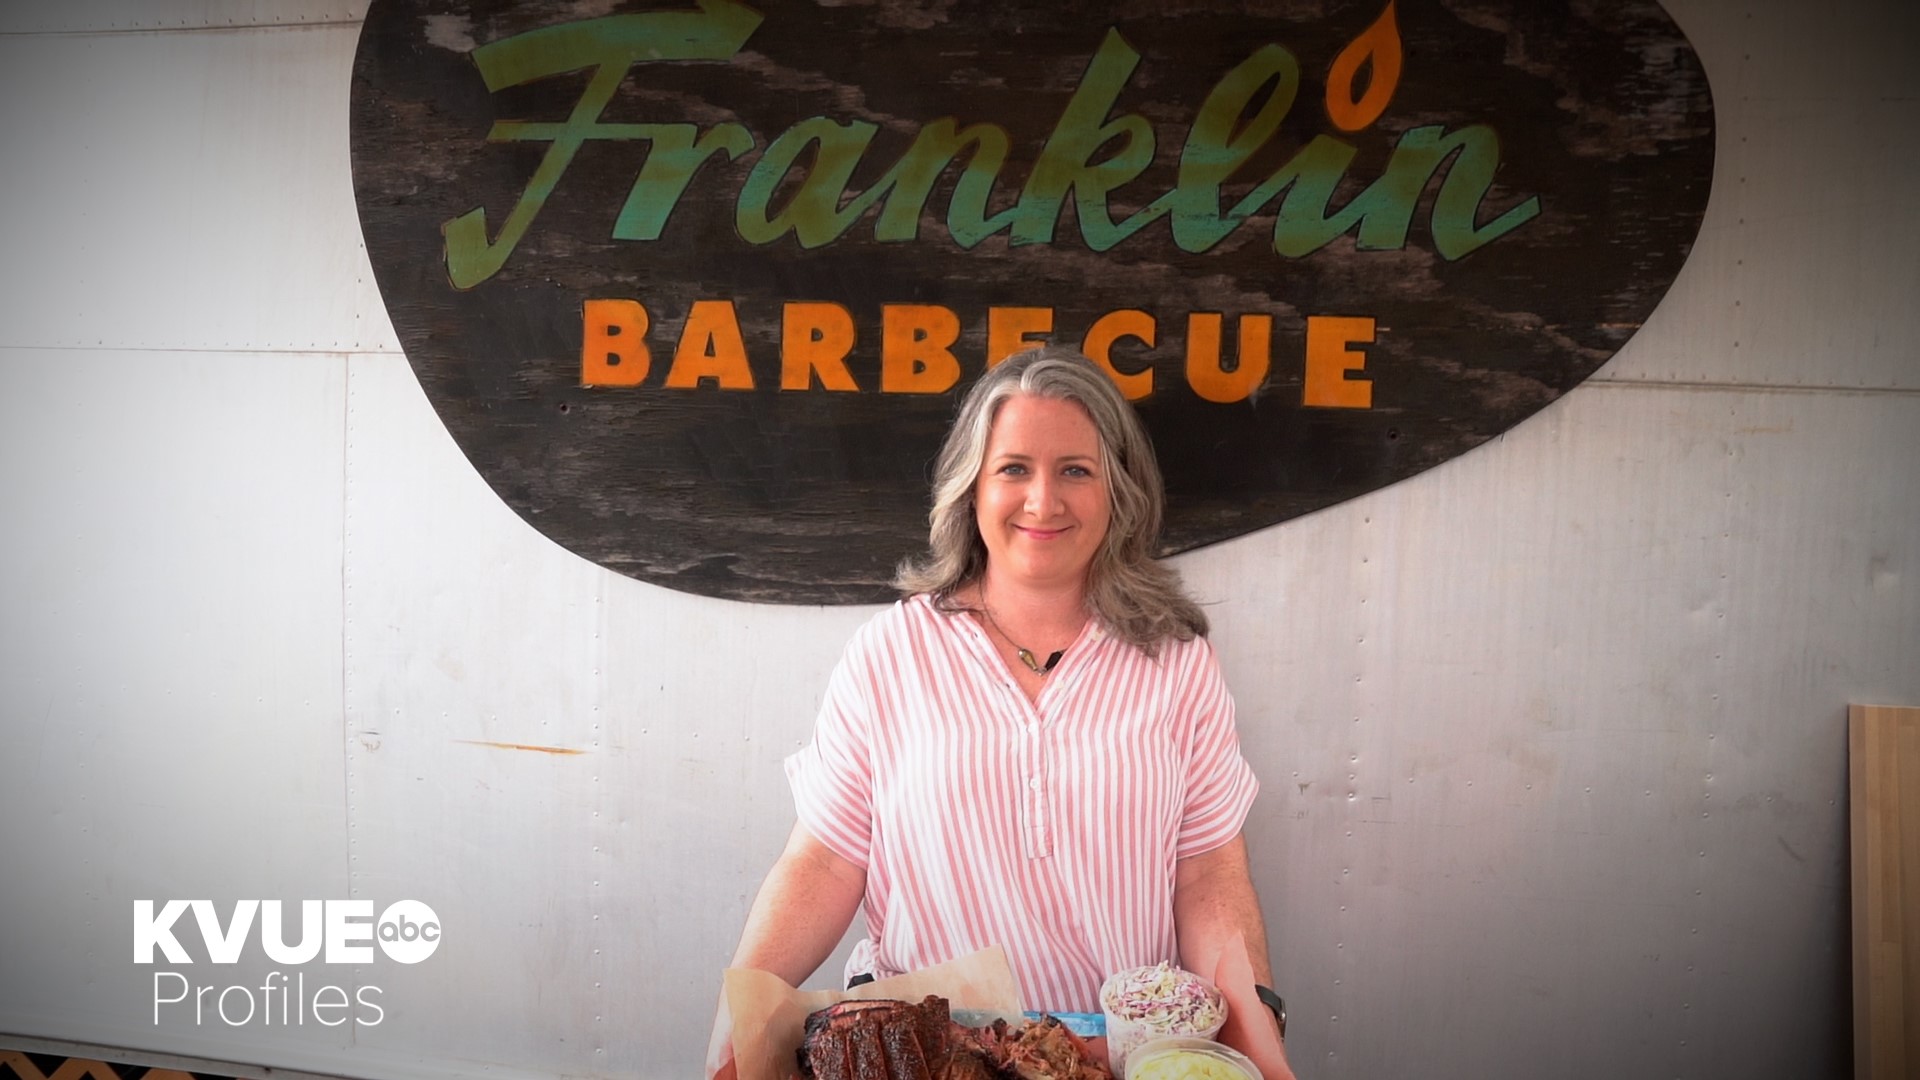 You know Franklin Barbecue – it’s one of the most popular barbecue joints in Texas. But do you know the woman behind the business?